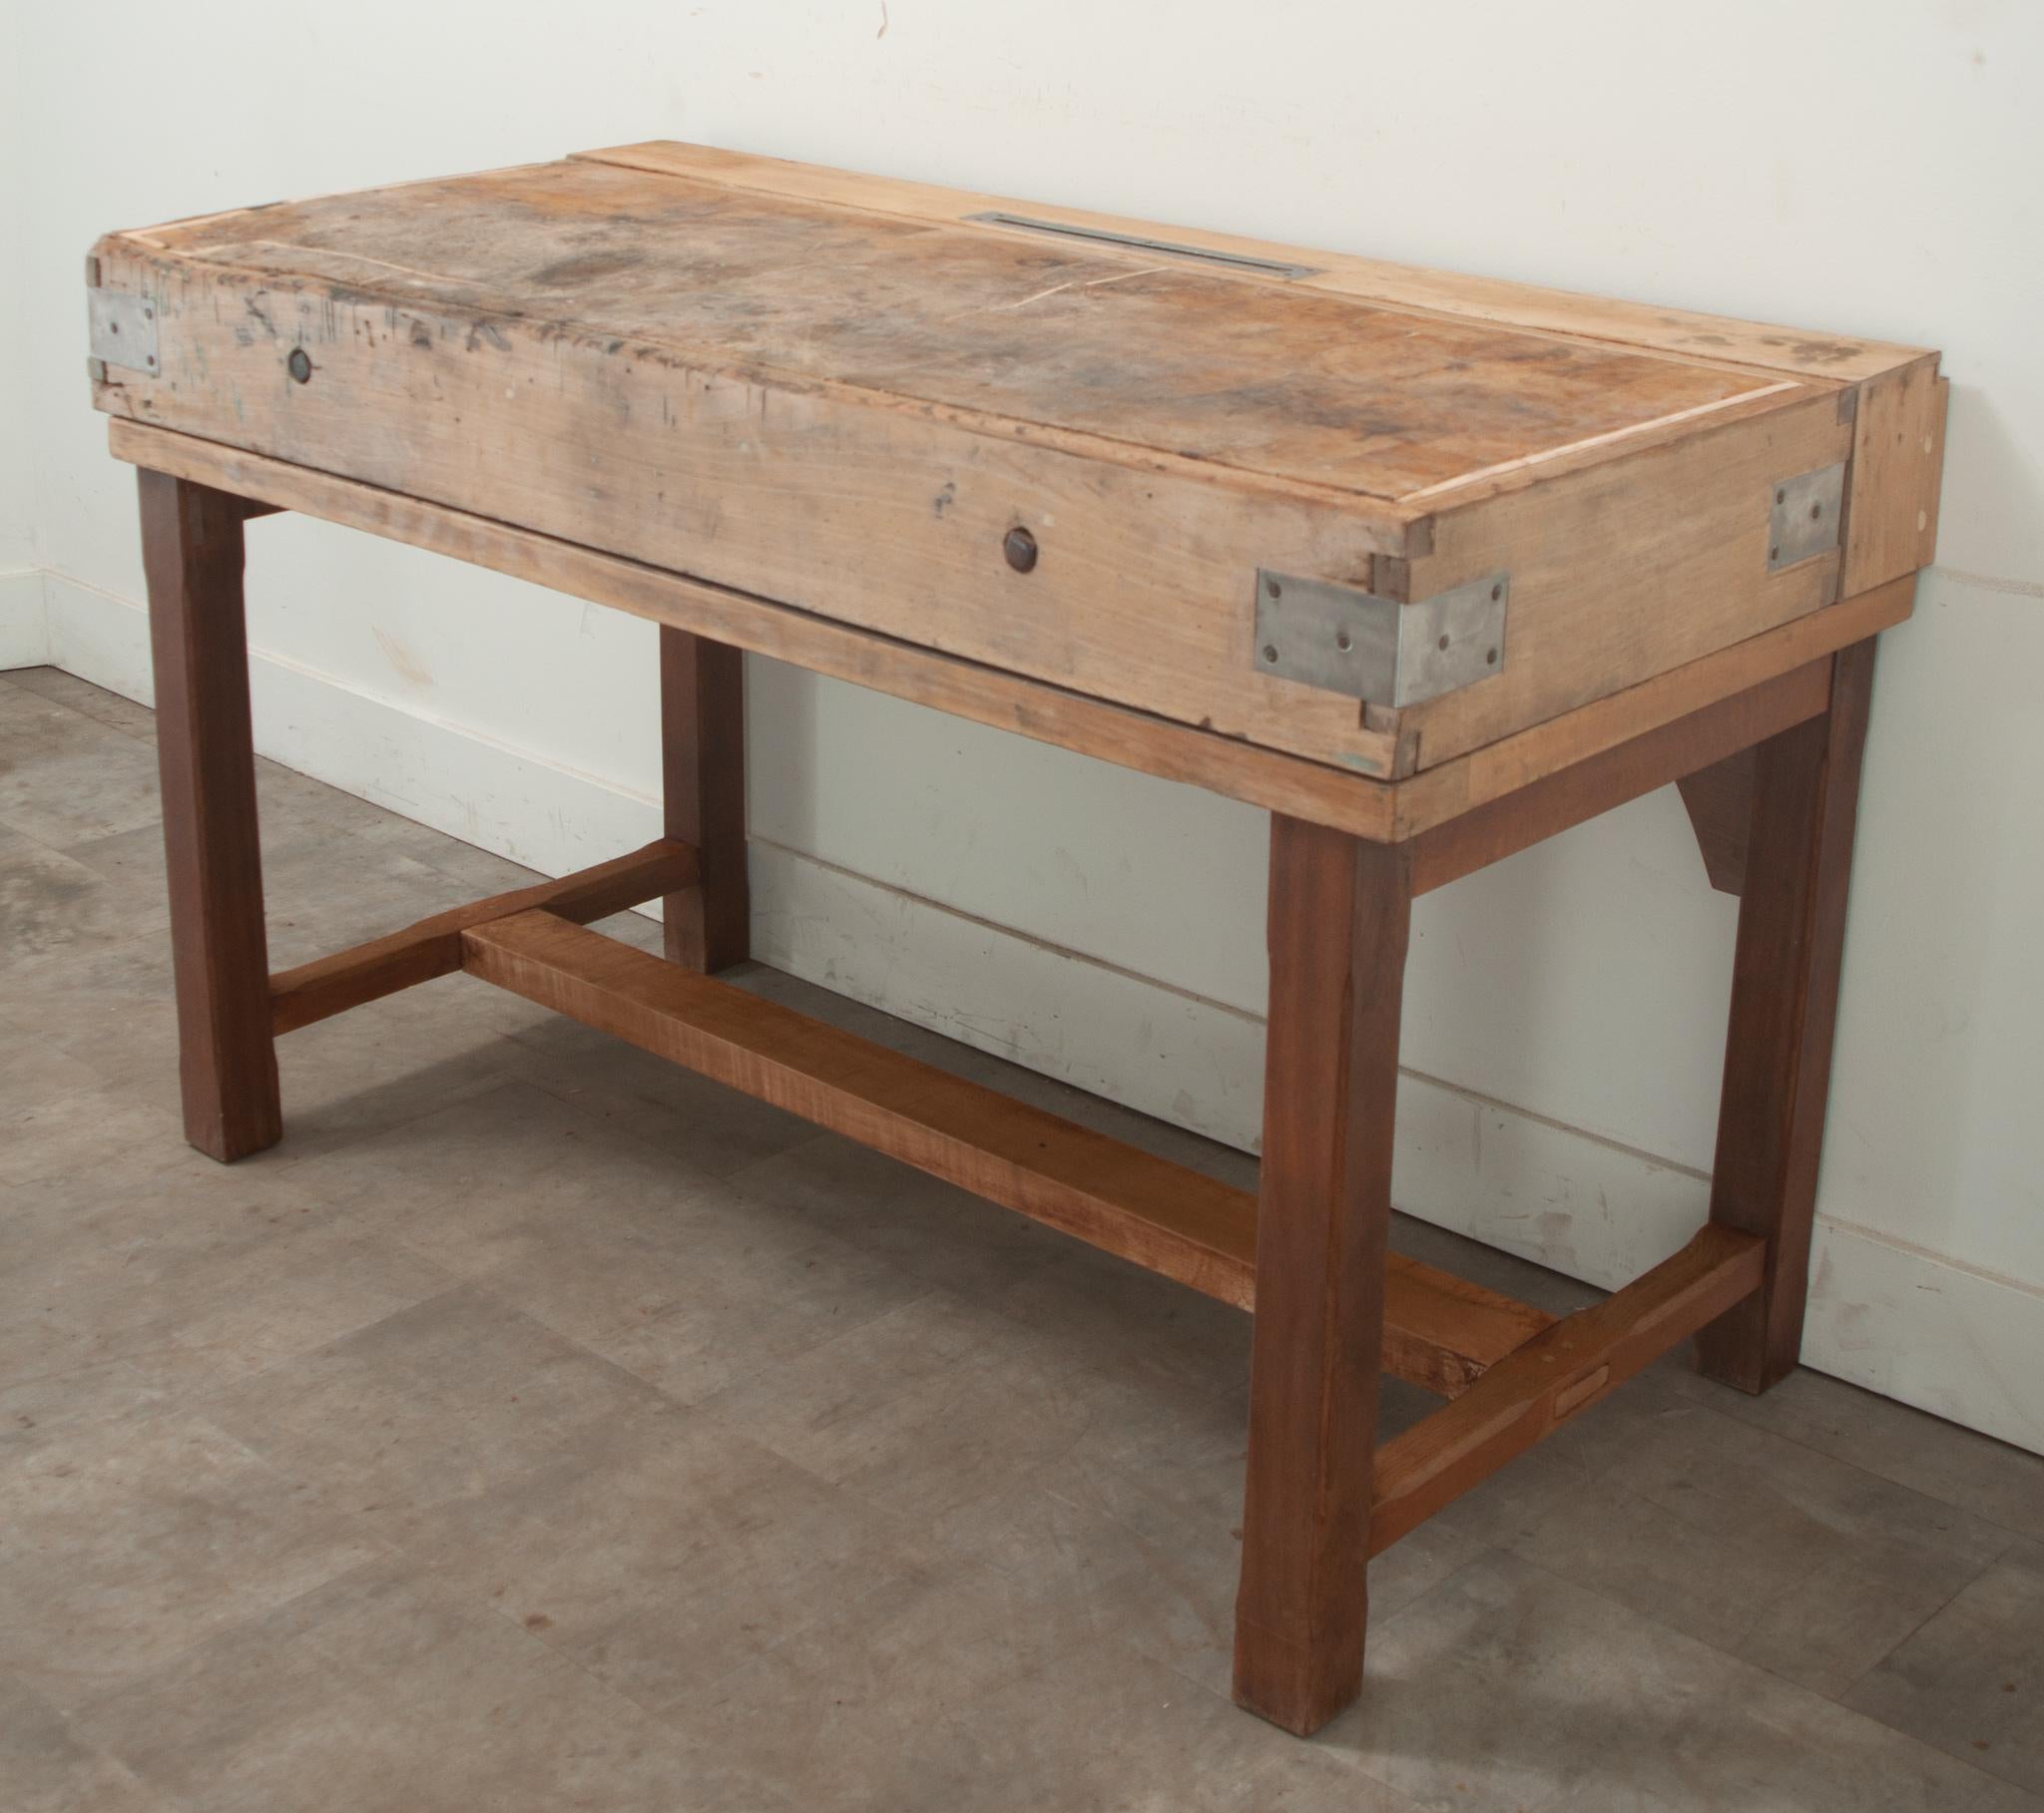 A French hand-built butcher block table made from oak and pine would make the perfect kitchen island. This functional antique has a thick top made of many wood fragments all held together with steel bindings. On the top surface you’ll find a lined